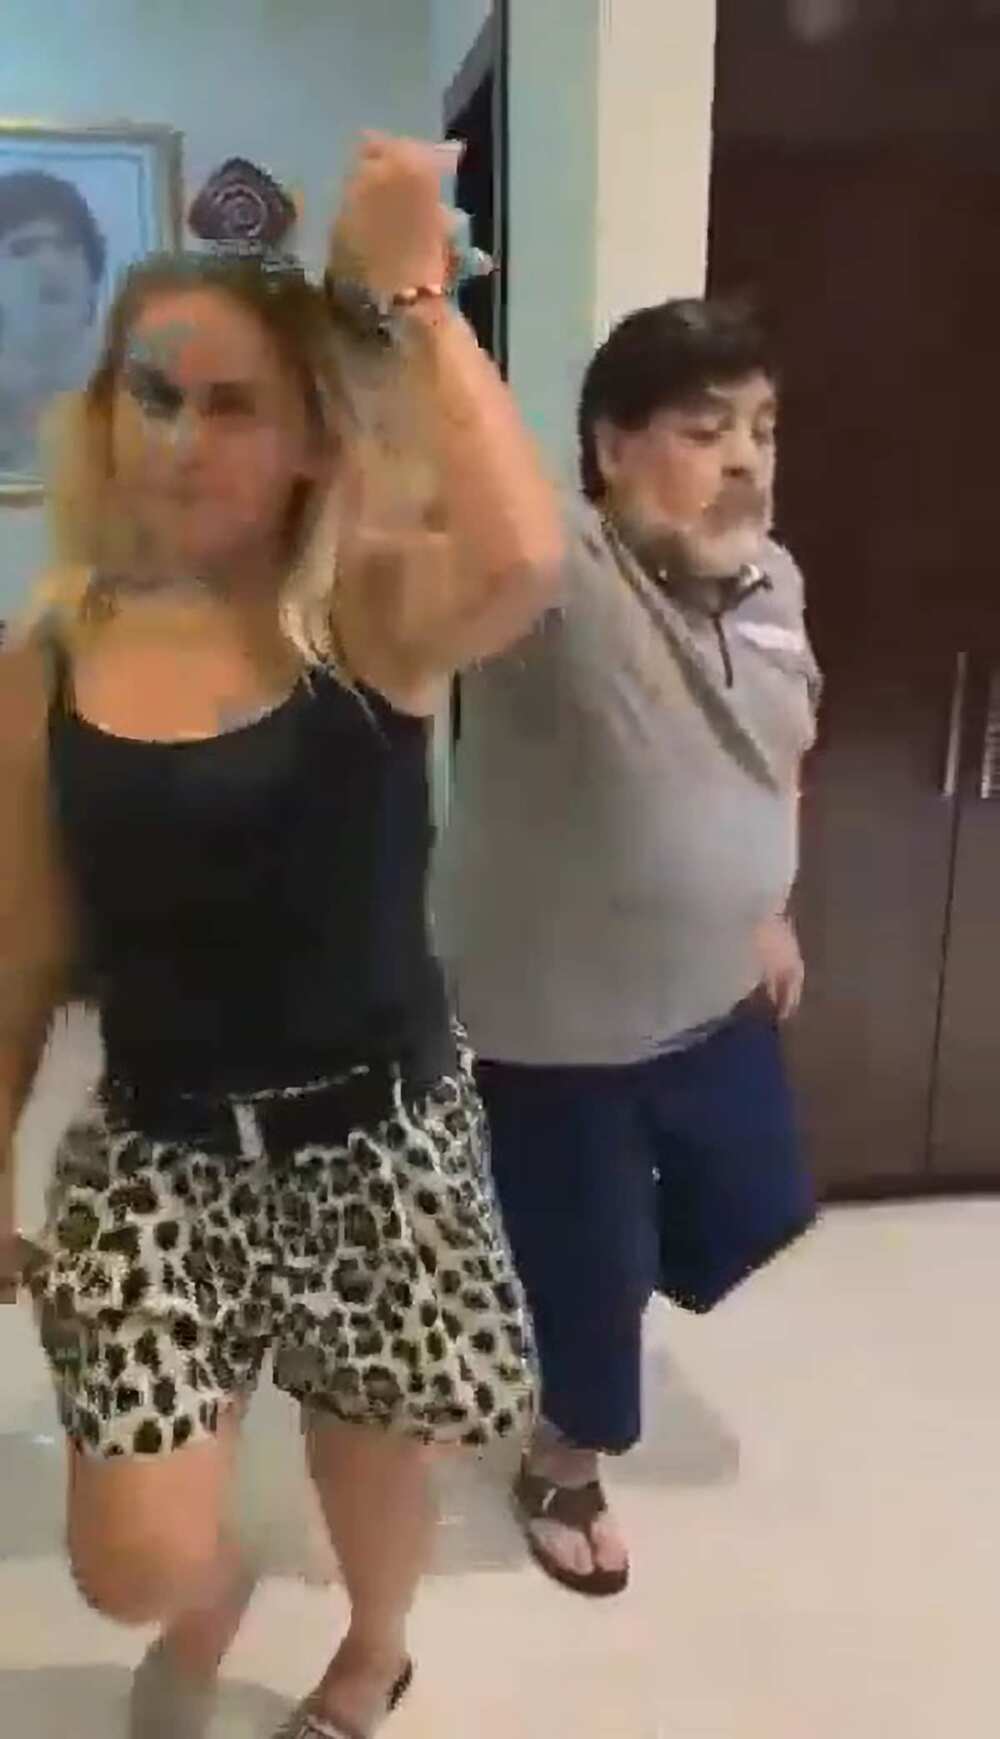 Diego Maradona drops trousers as he dances with ex-girlfriend in viral video